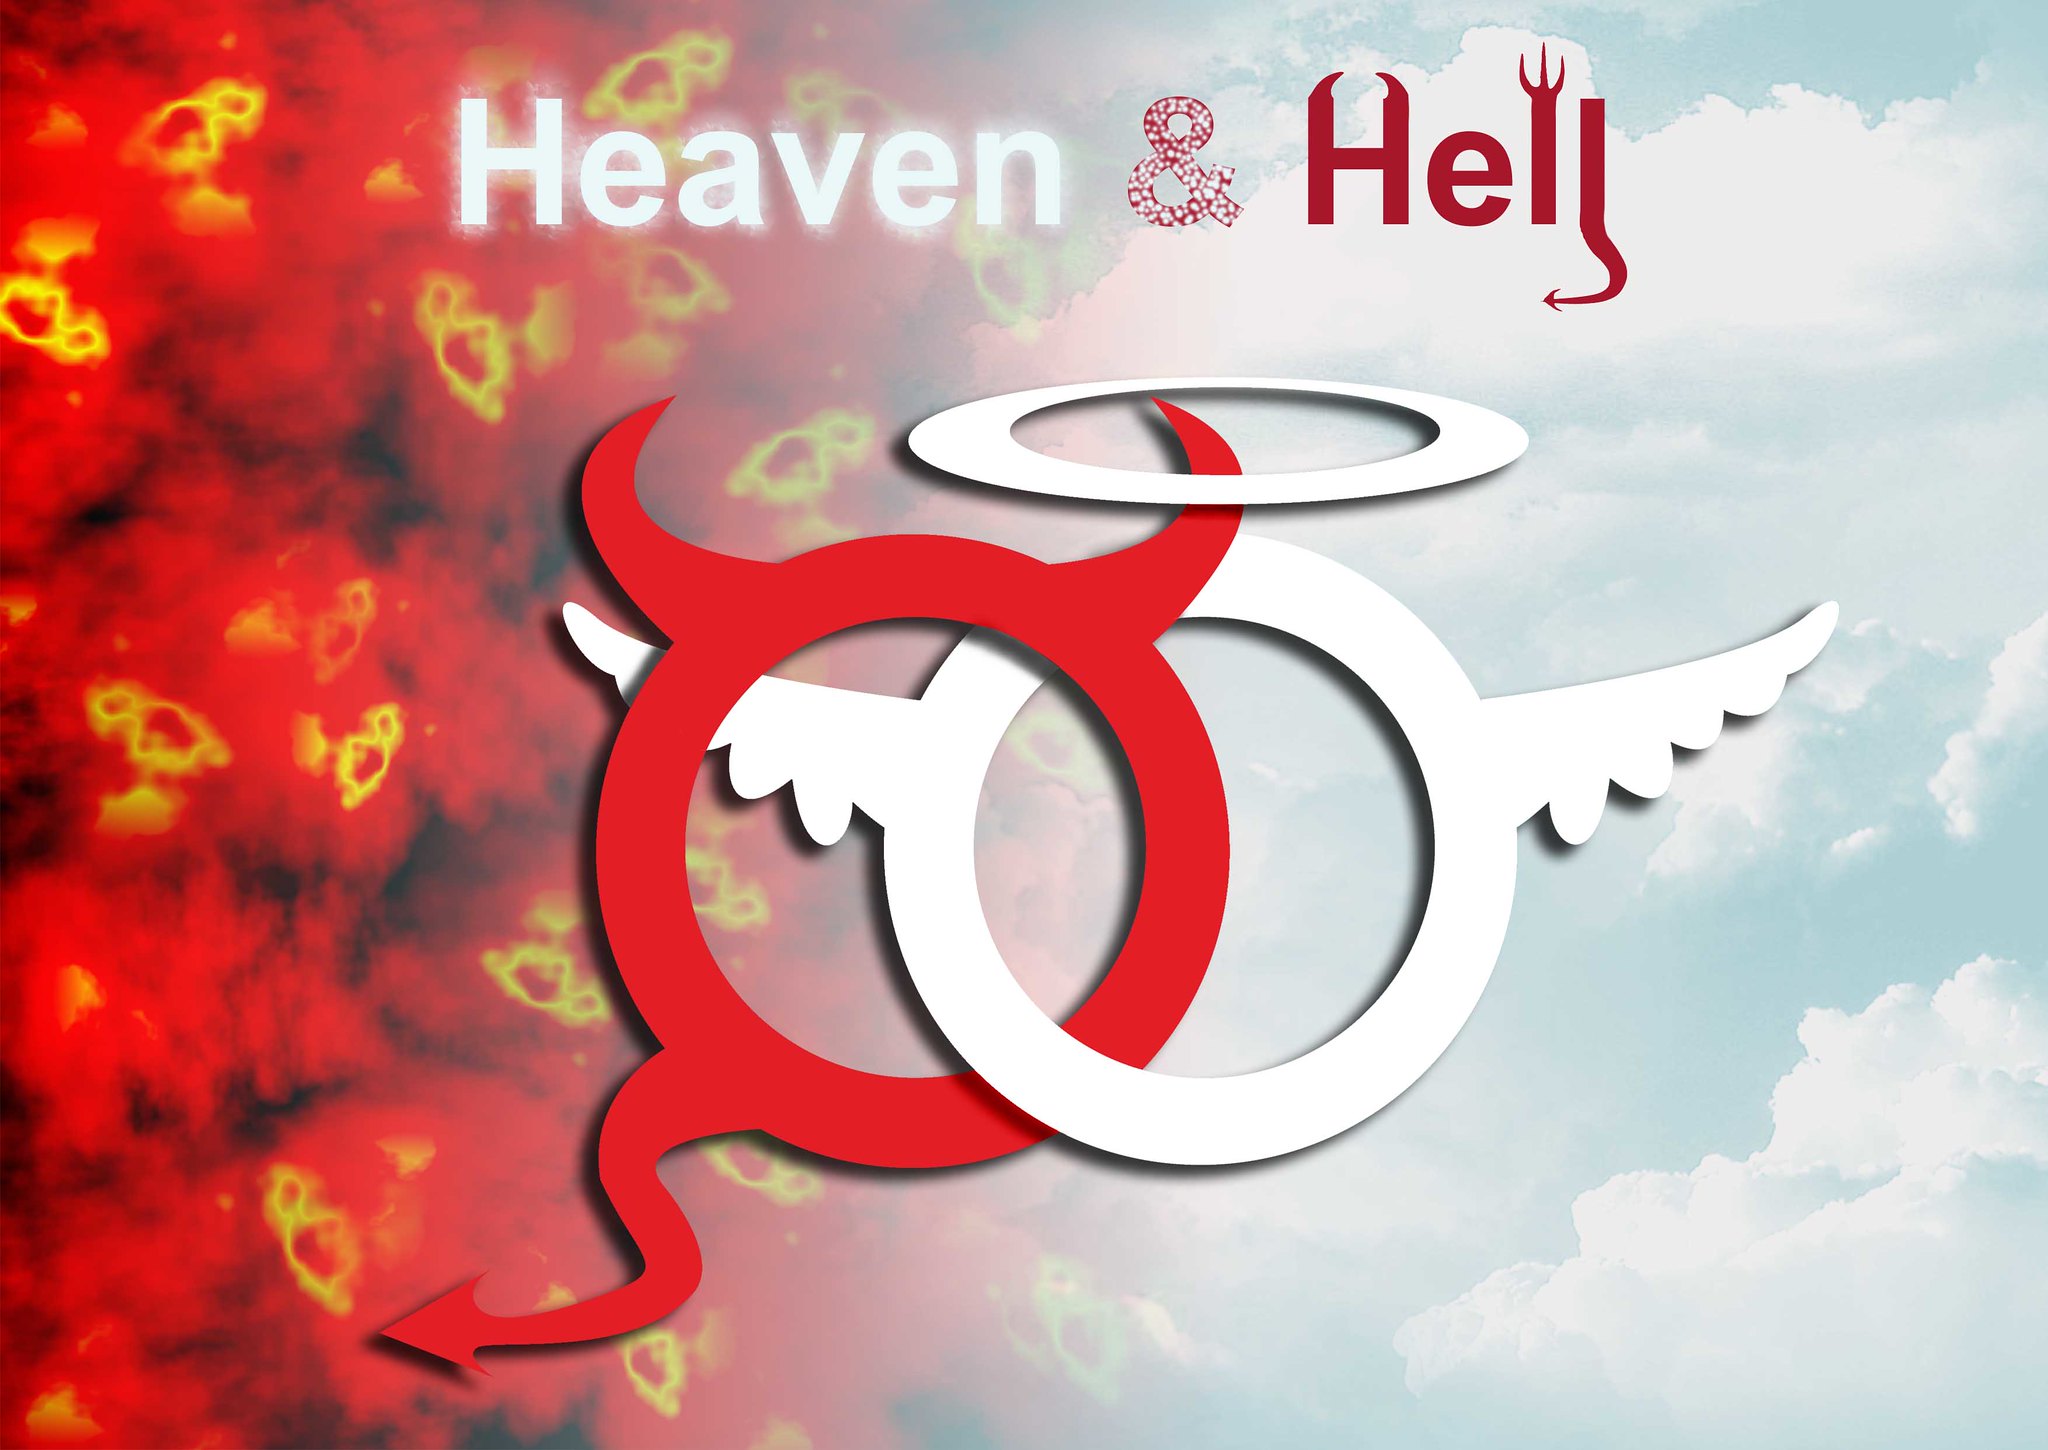 Host A Divinely Sinful Heaven & Hell Themed Party